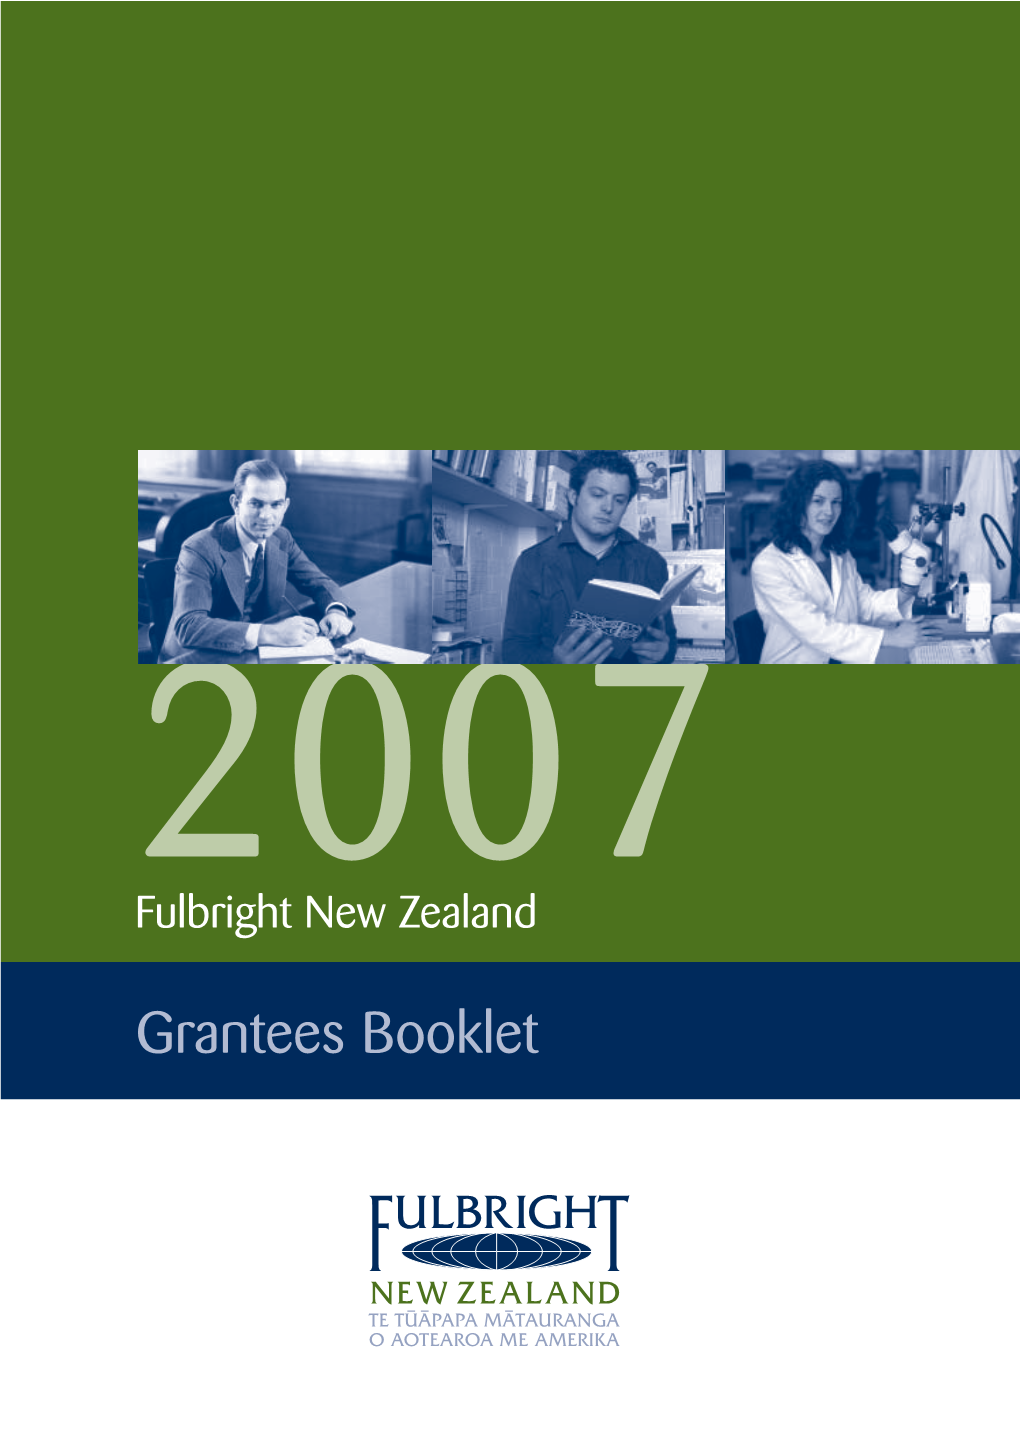 2007 Fulbright New Zealand Grantees Booklet